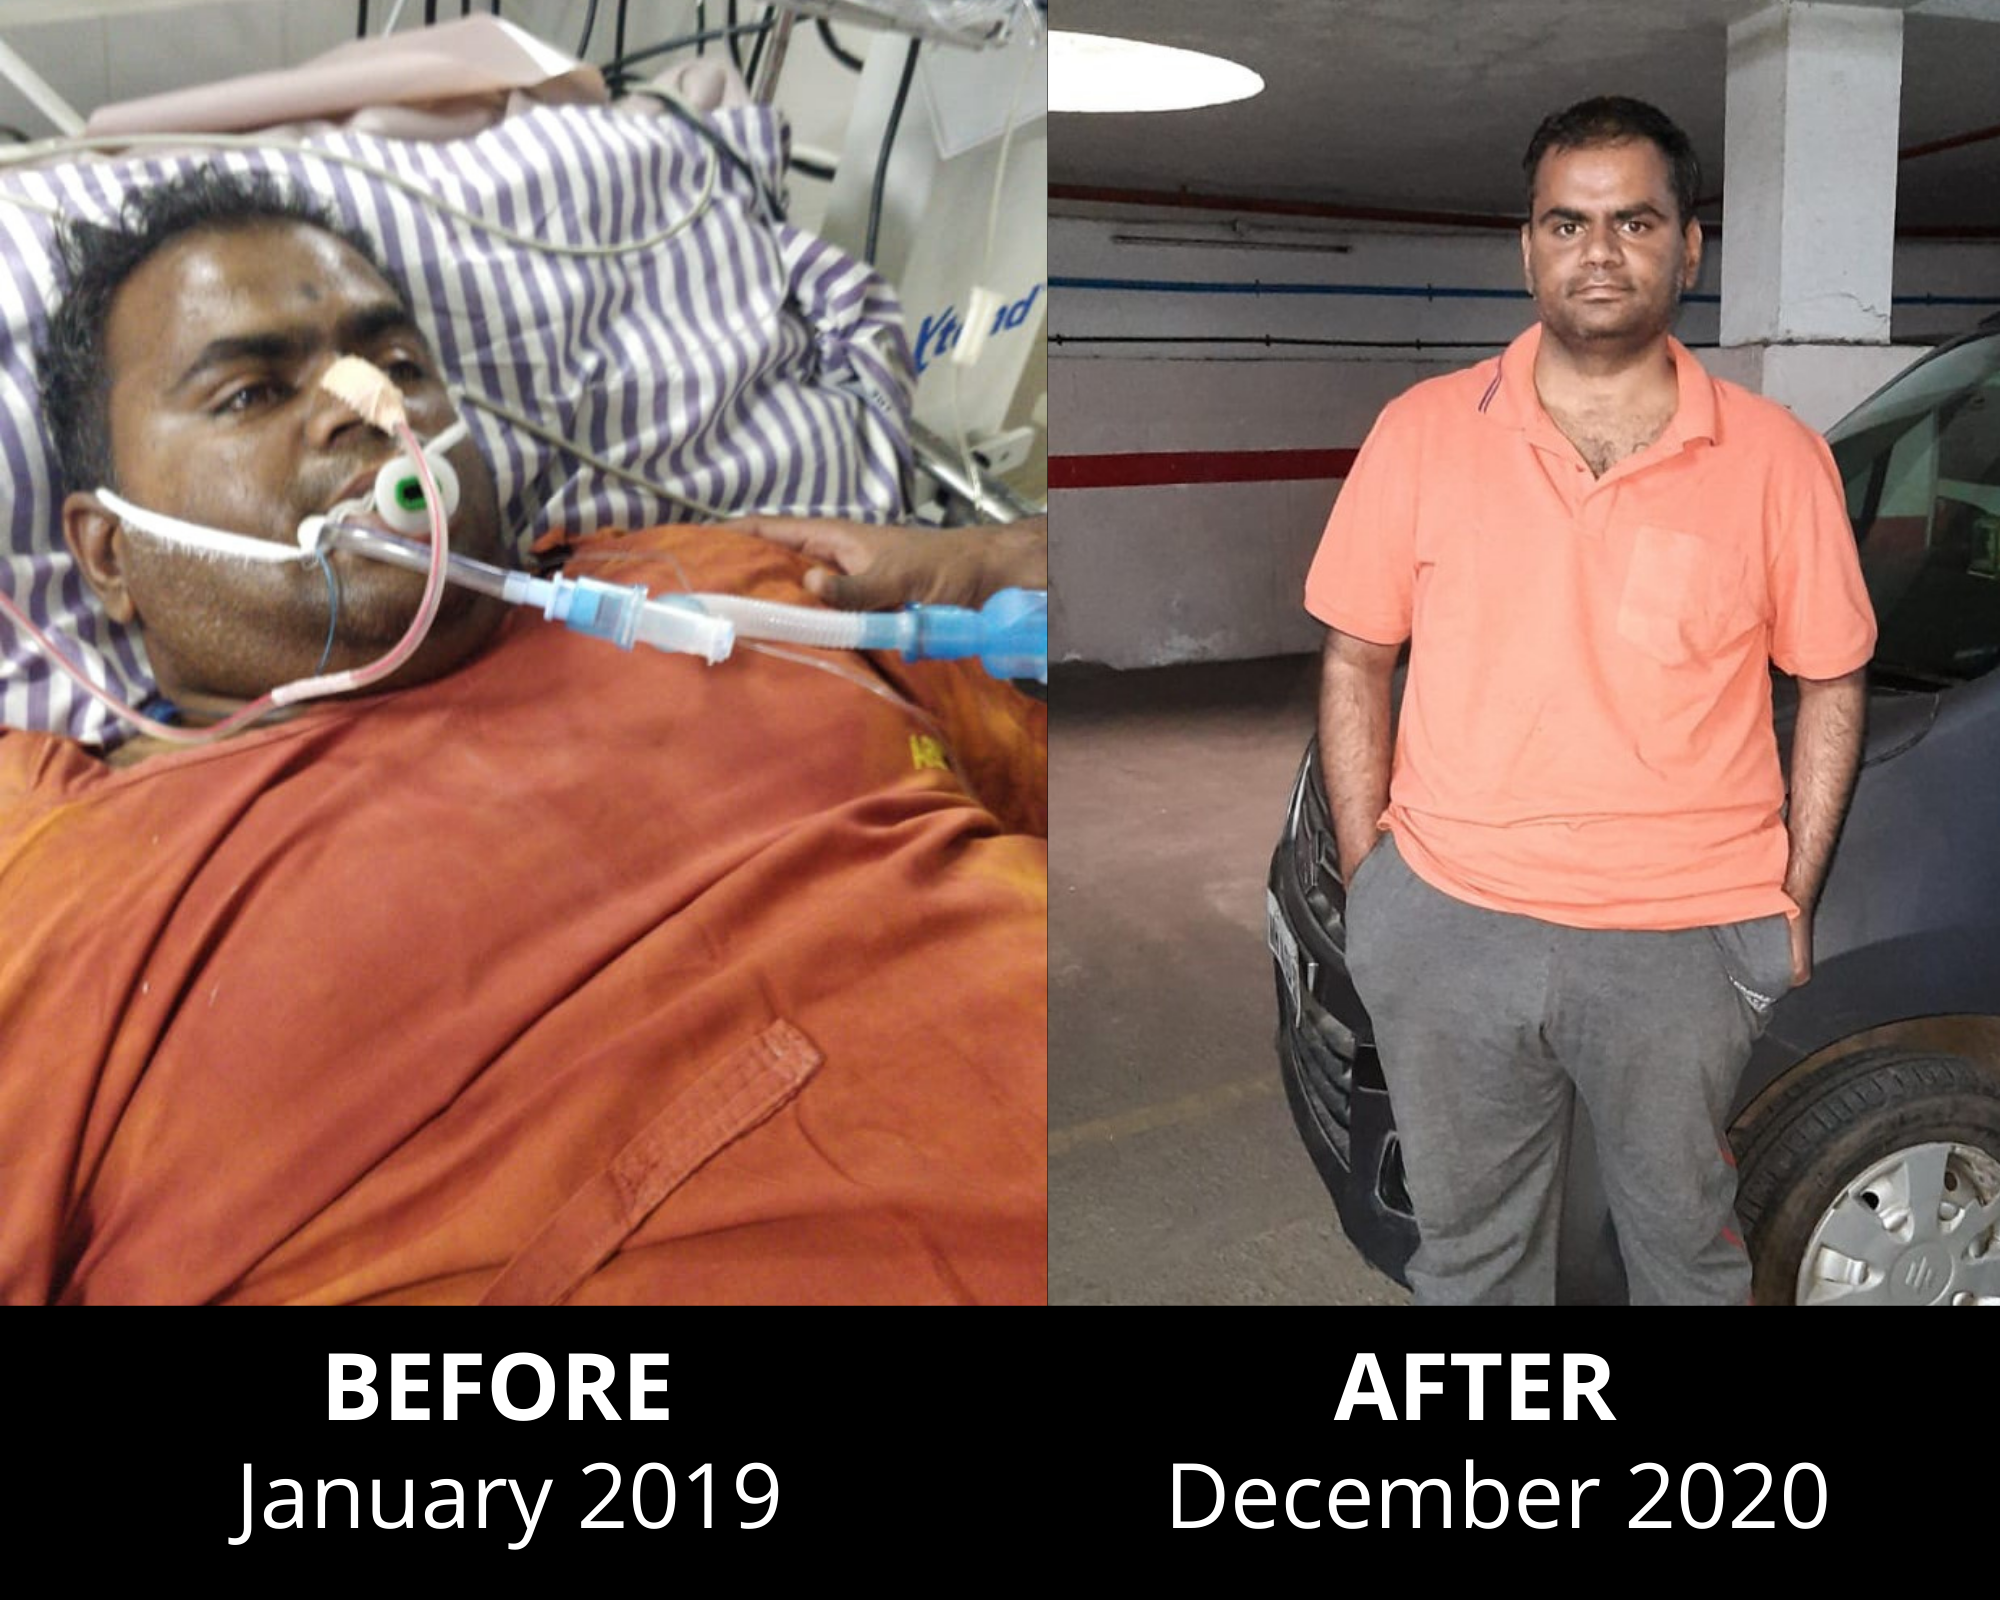 Ravindra reverses high blood pressure, psoriasis & stands back on his feet